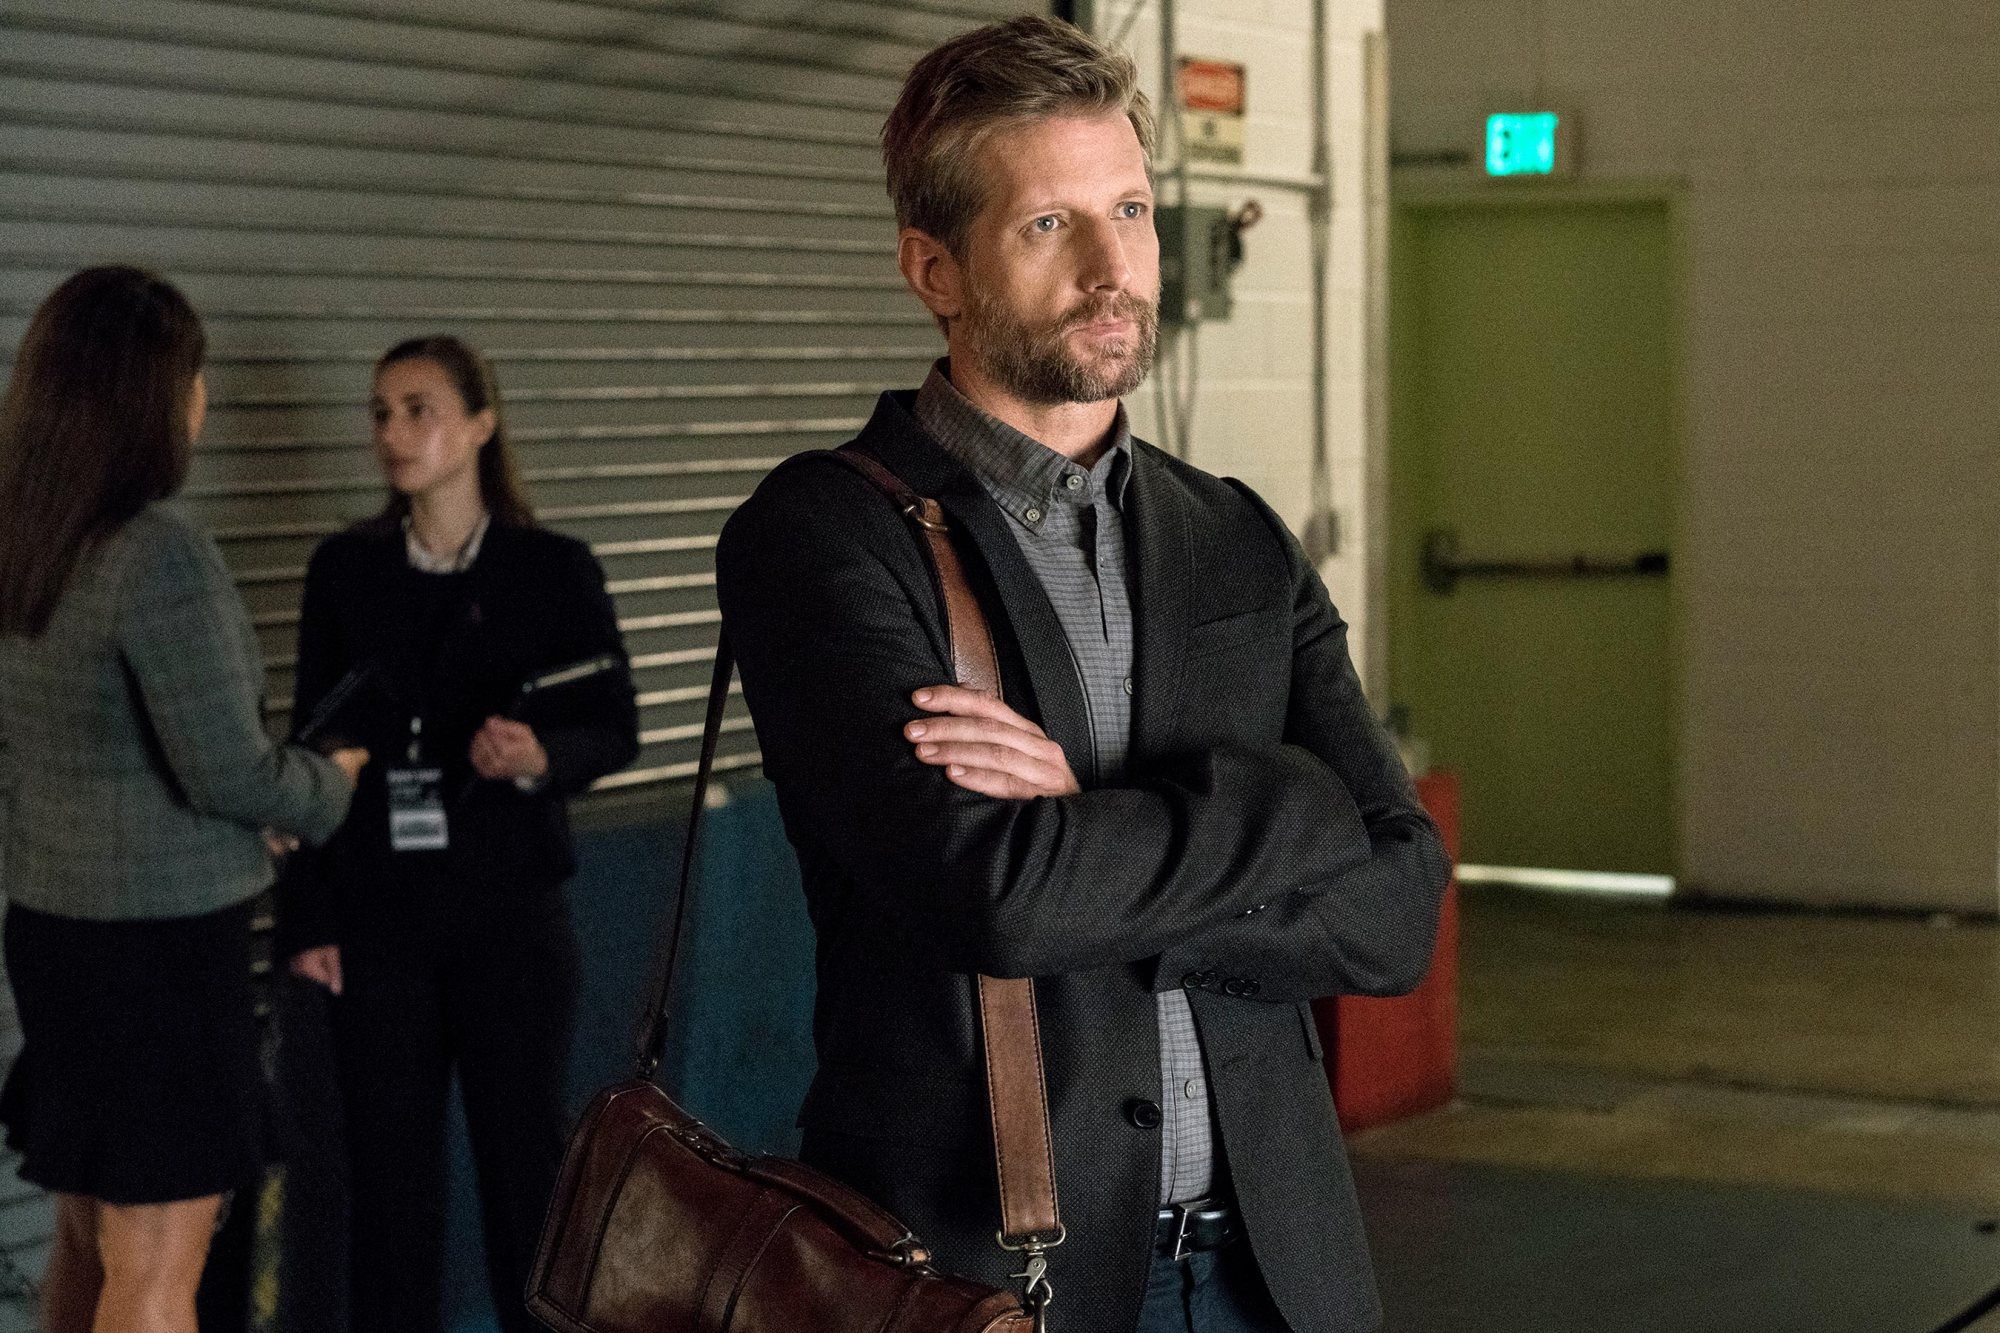 Tom Yates, played by Paul Sparks, acts on the set of House of Cards